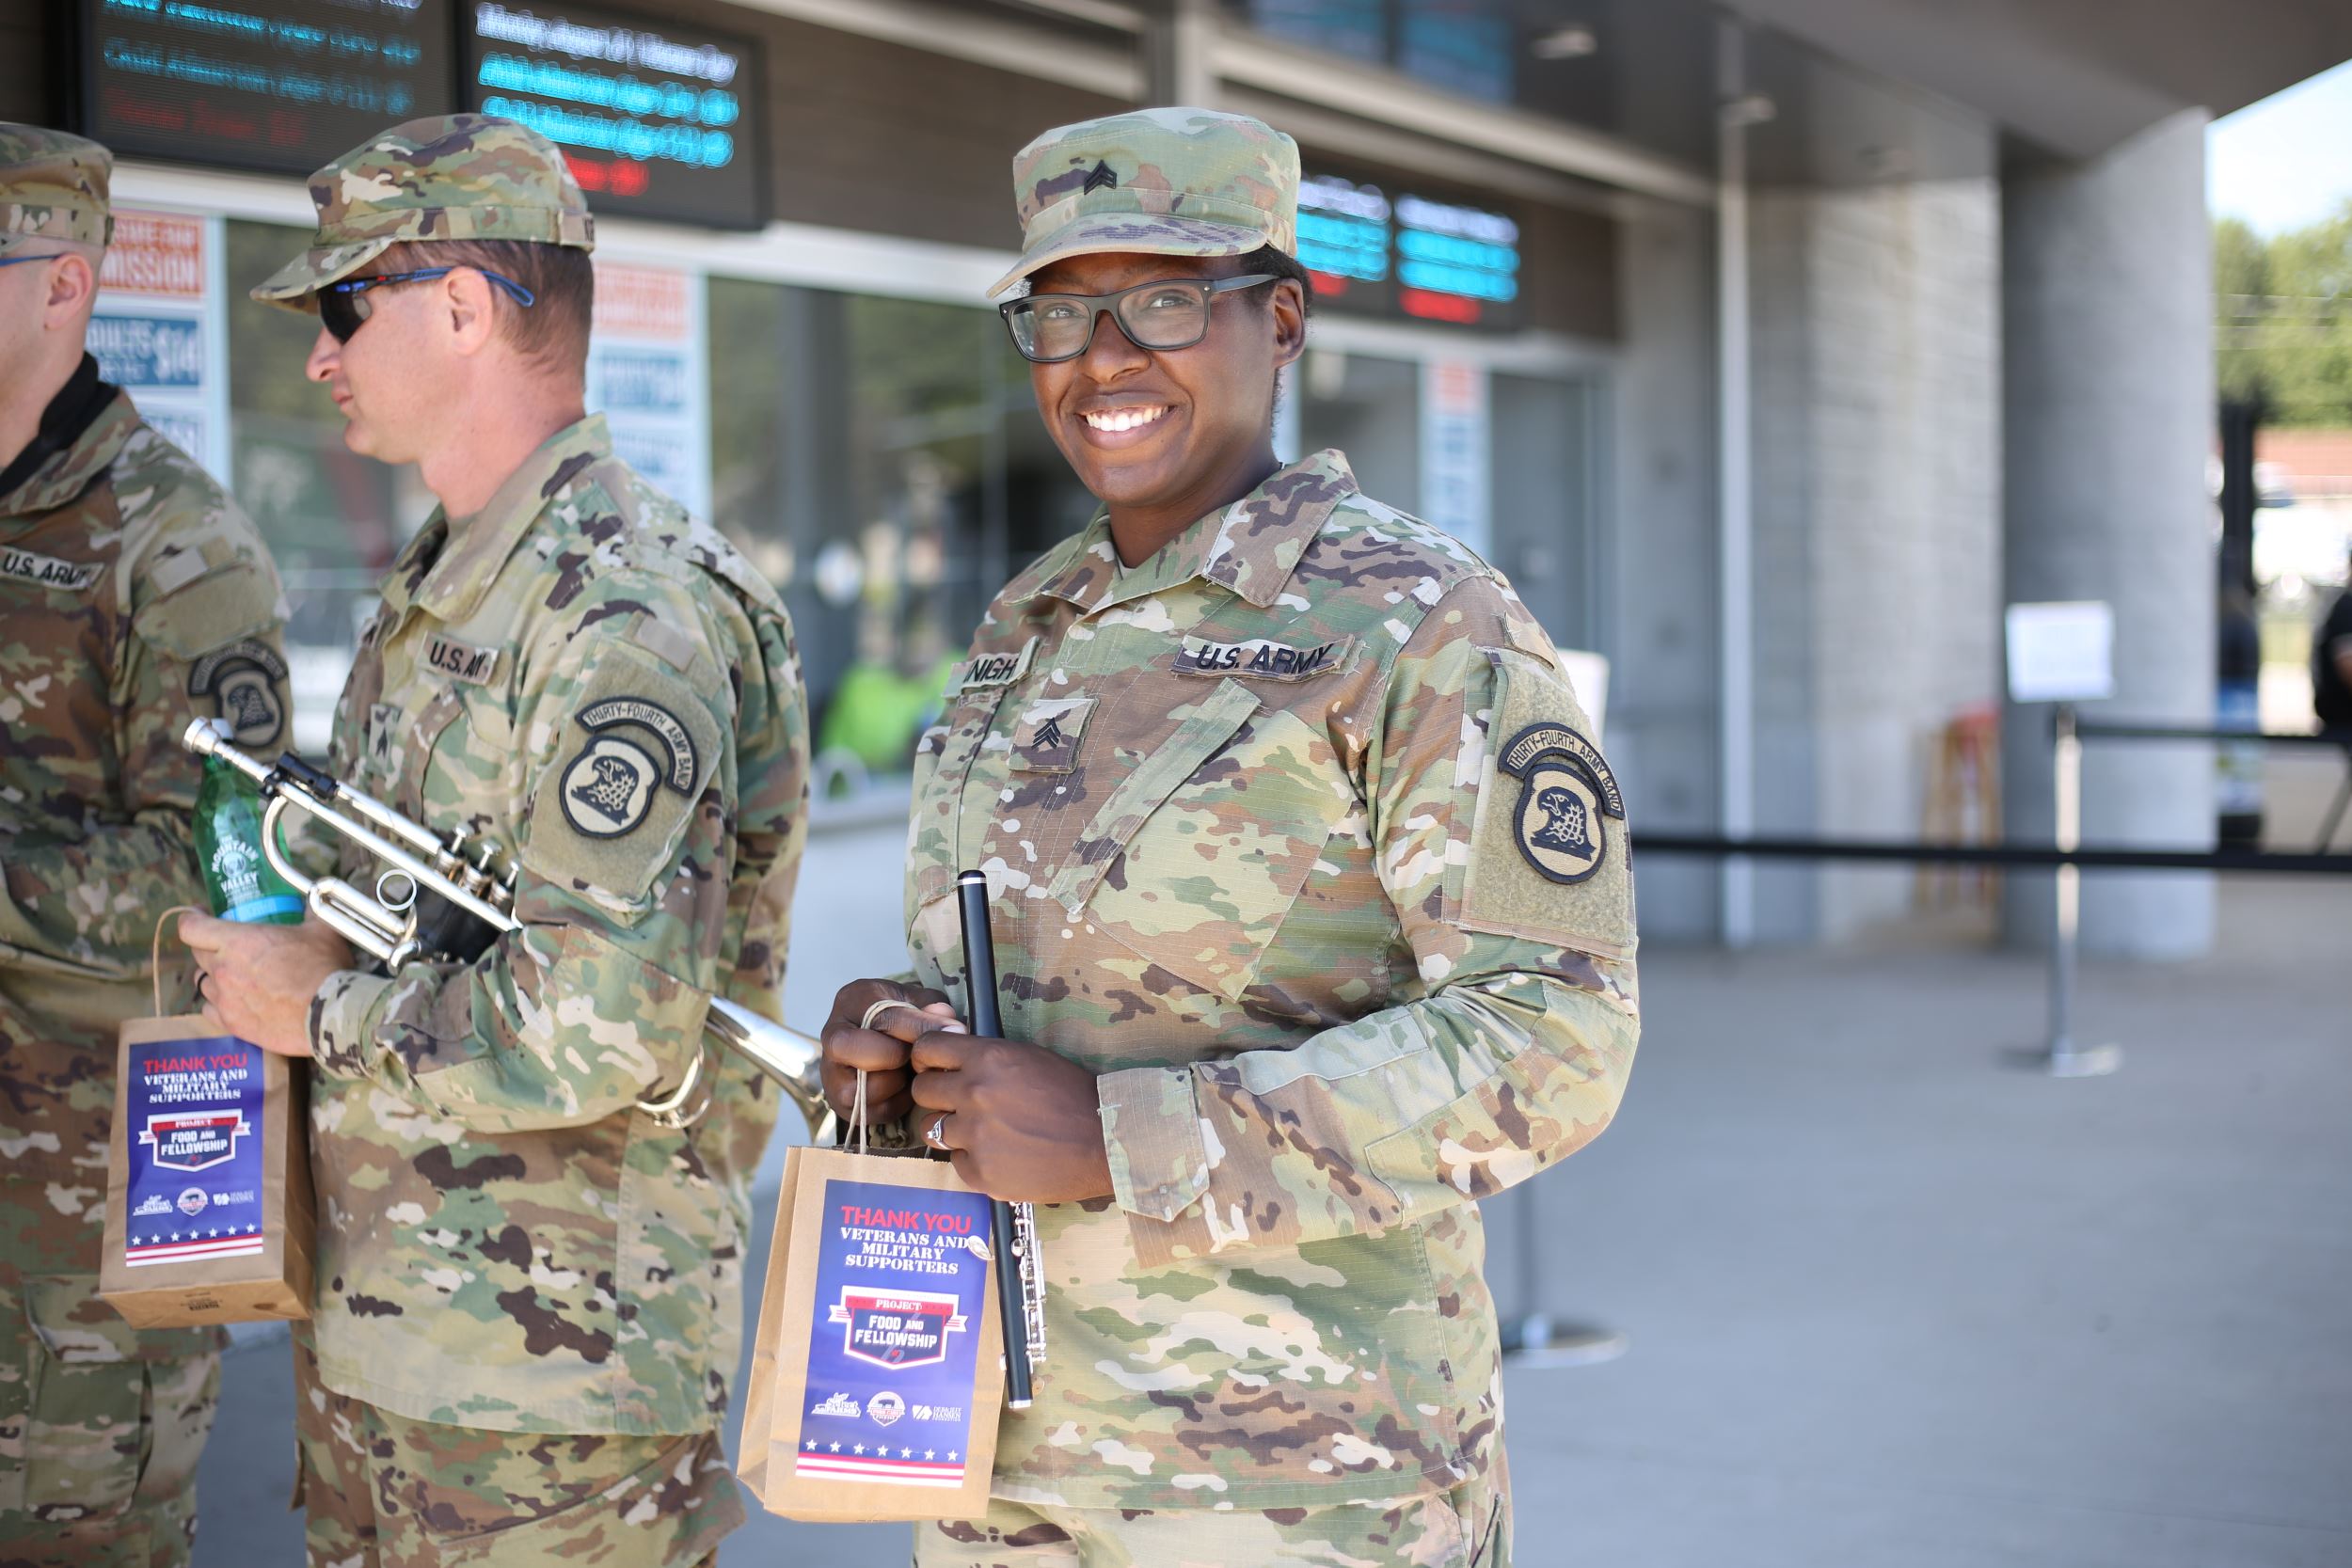 Military member in full uniform poses with a bag of food.